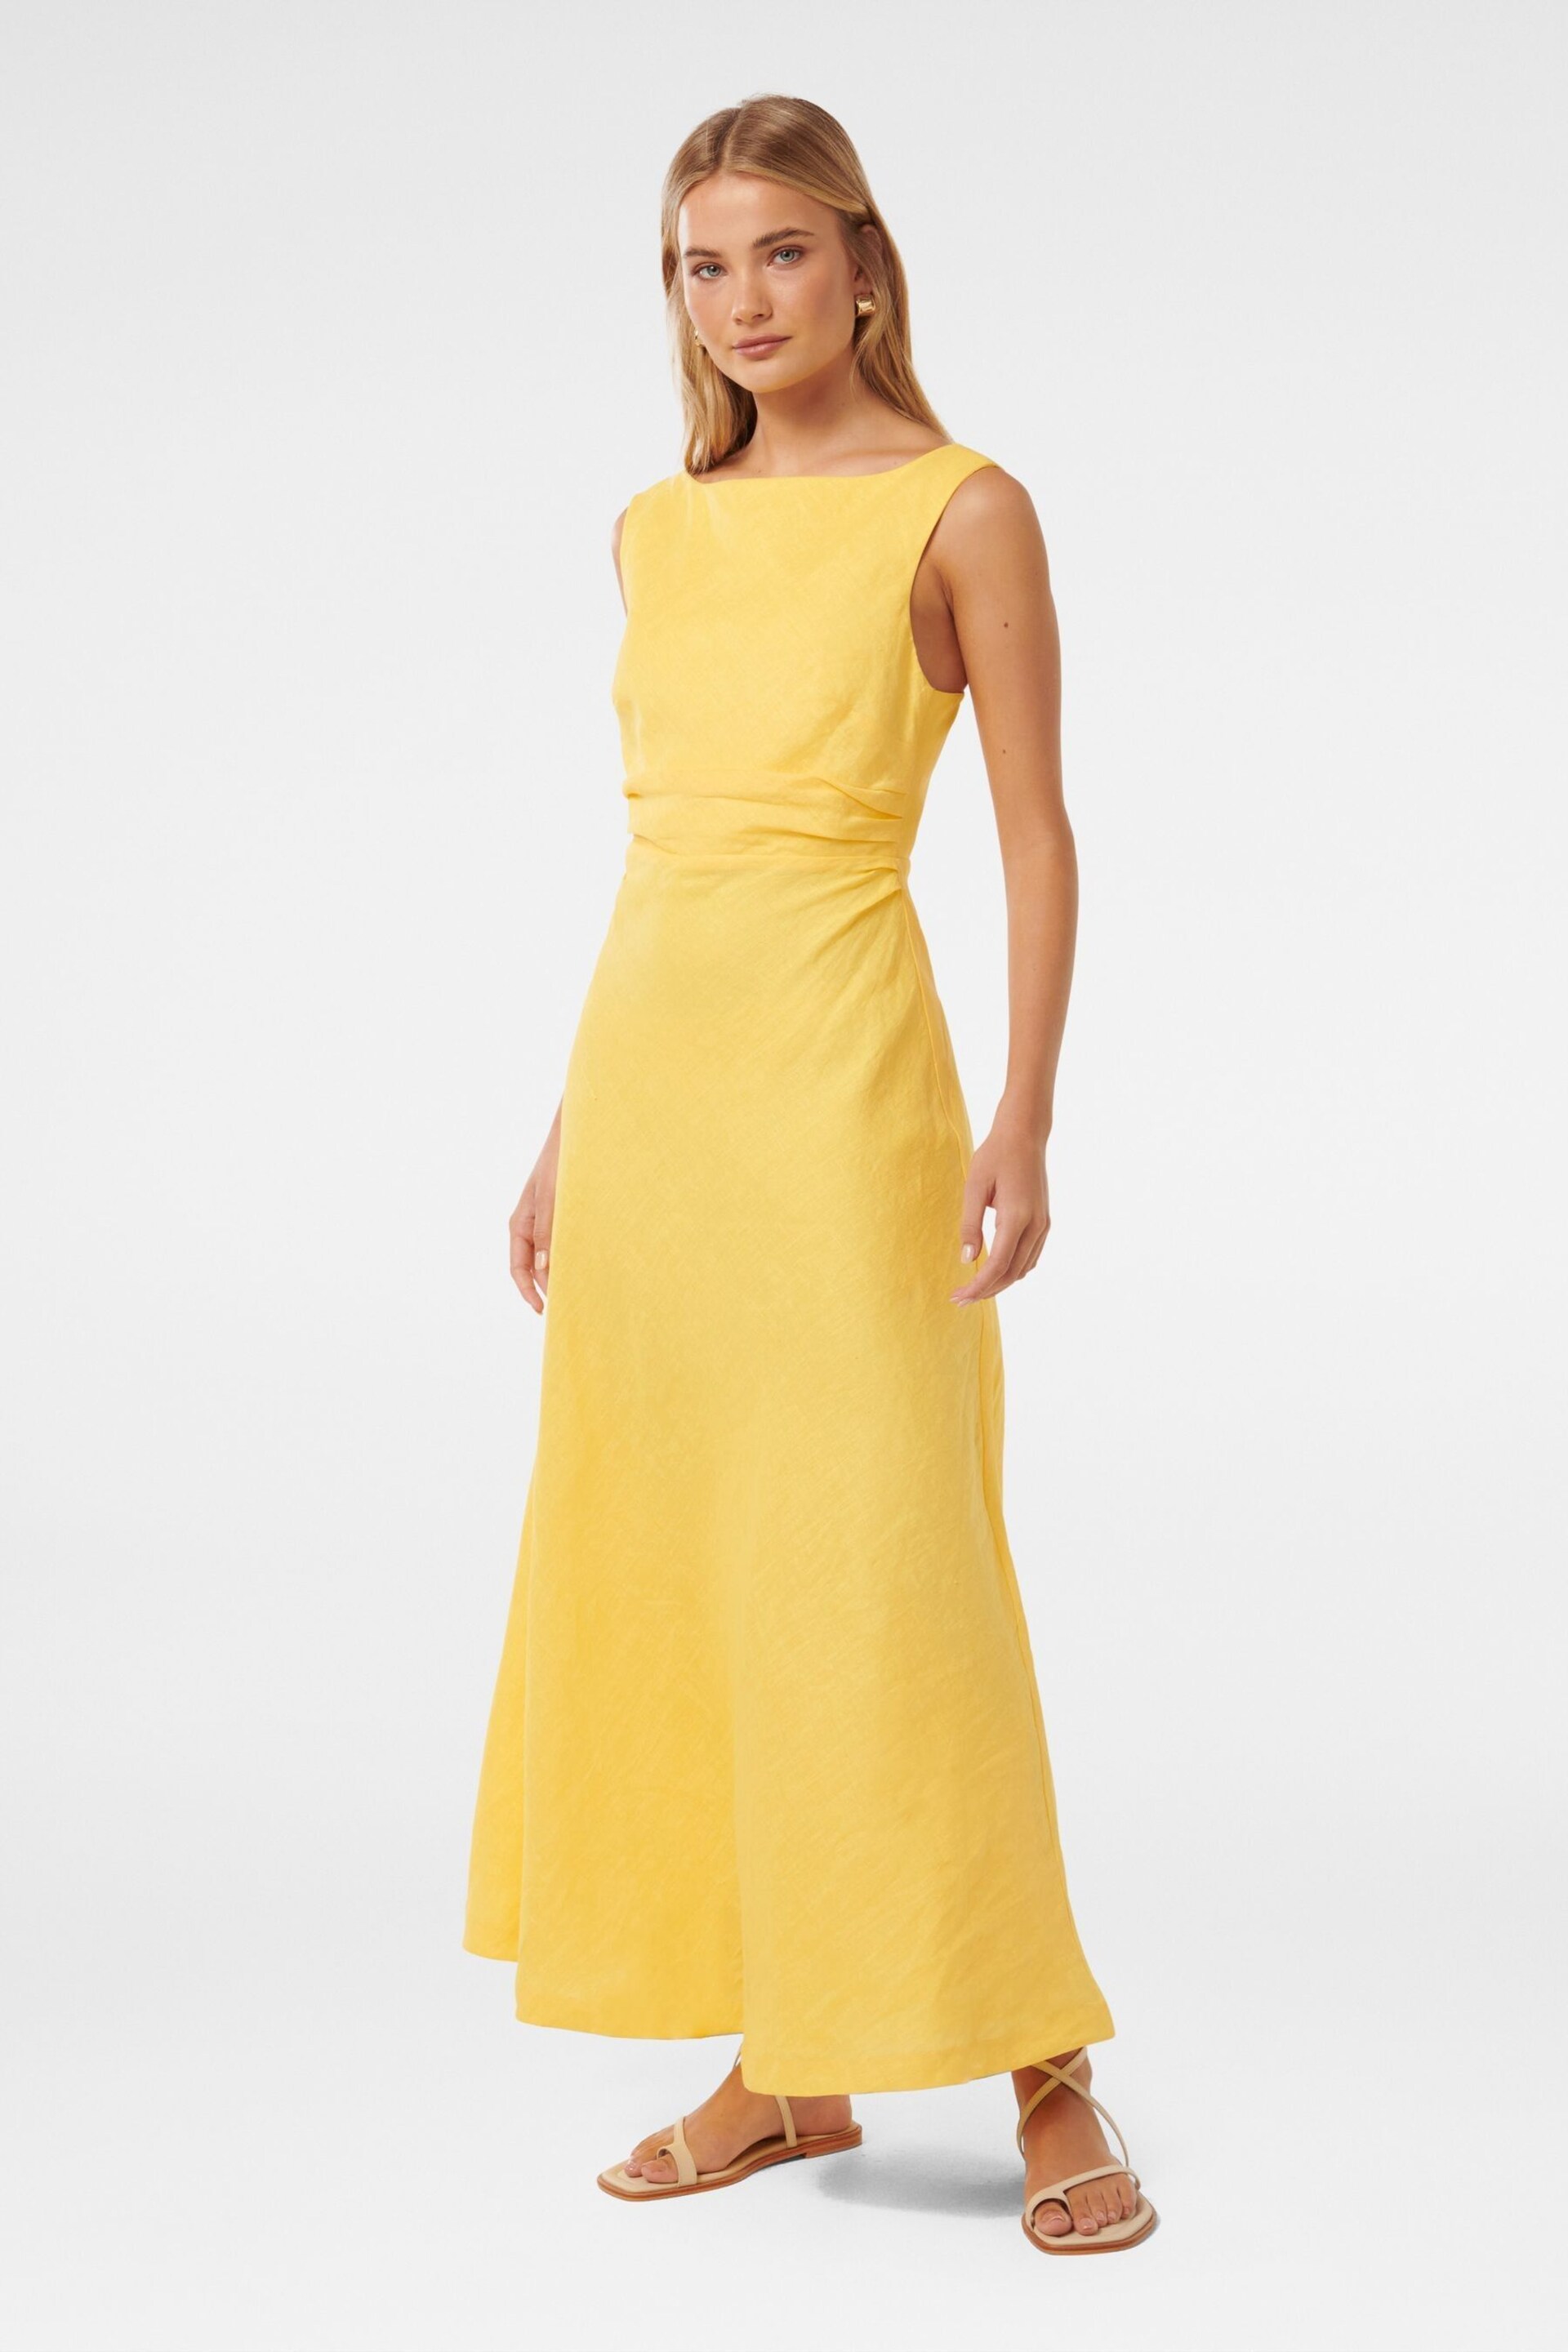 Forever New Yellow Pure Linen Tania Dress - Image 3 of 4